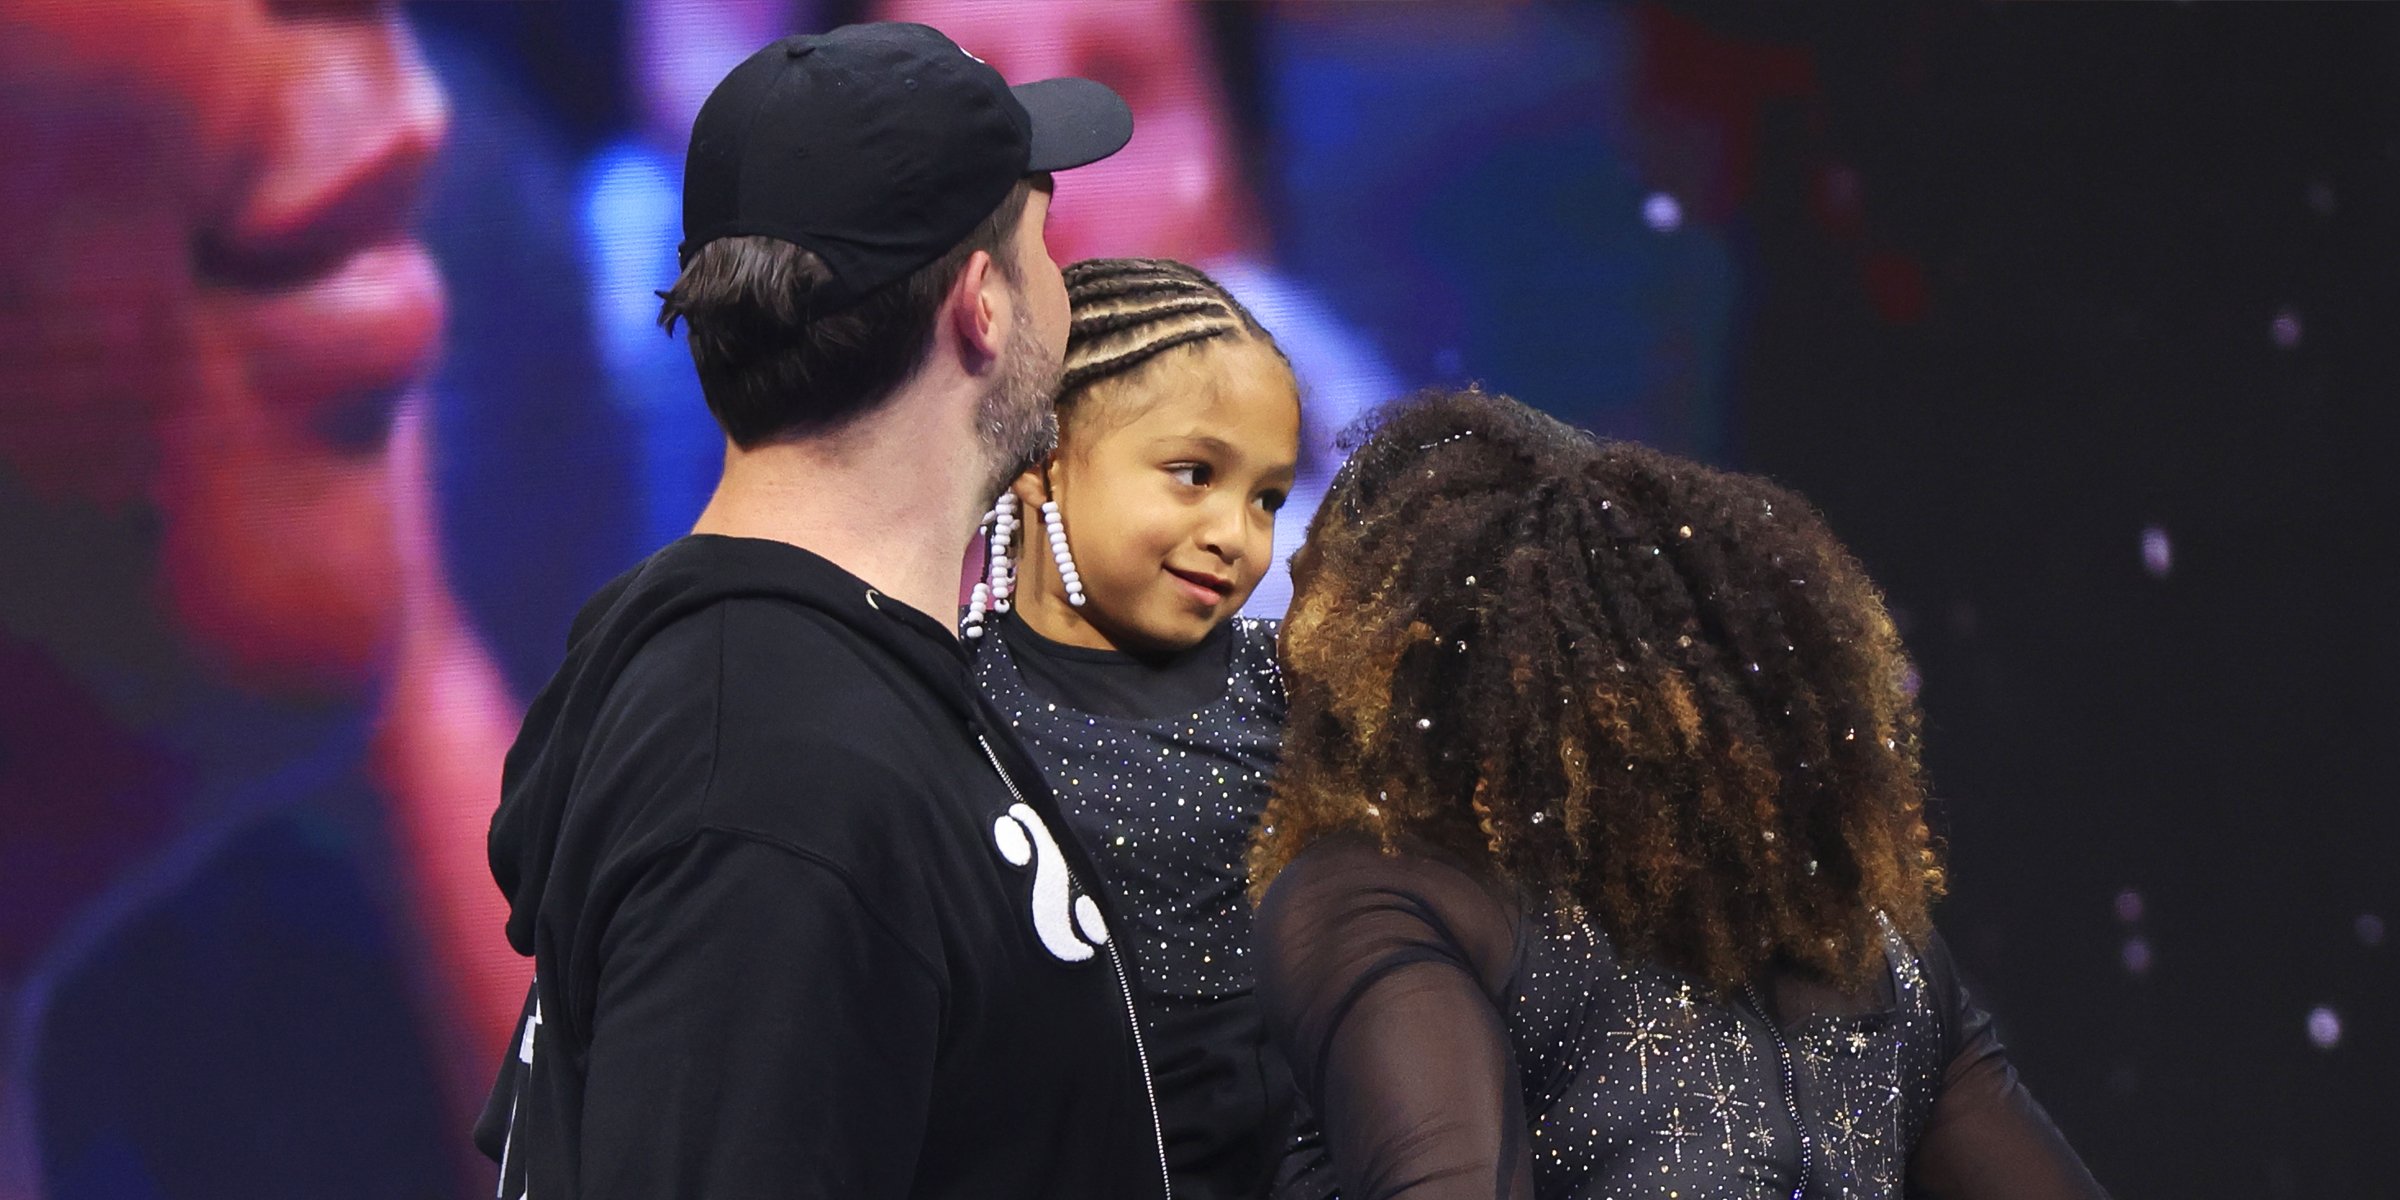 Serena Williams, Alexis Ohanian, and their daughter, Alexis Olympia Ohanian Jr. | Source: Getty Images